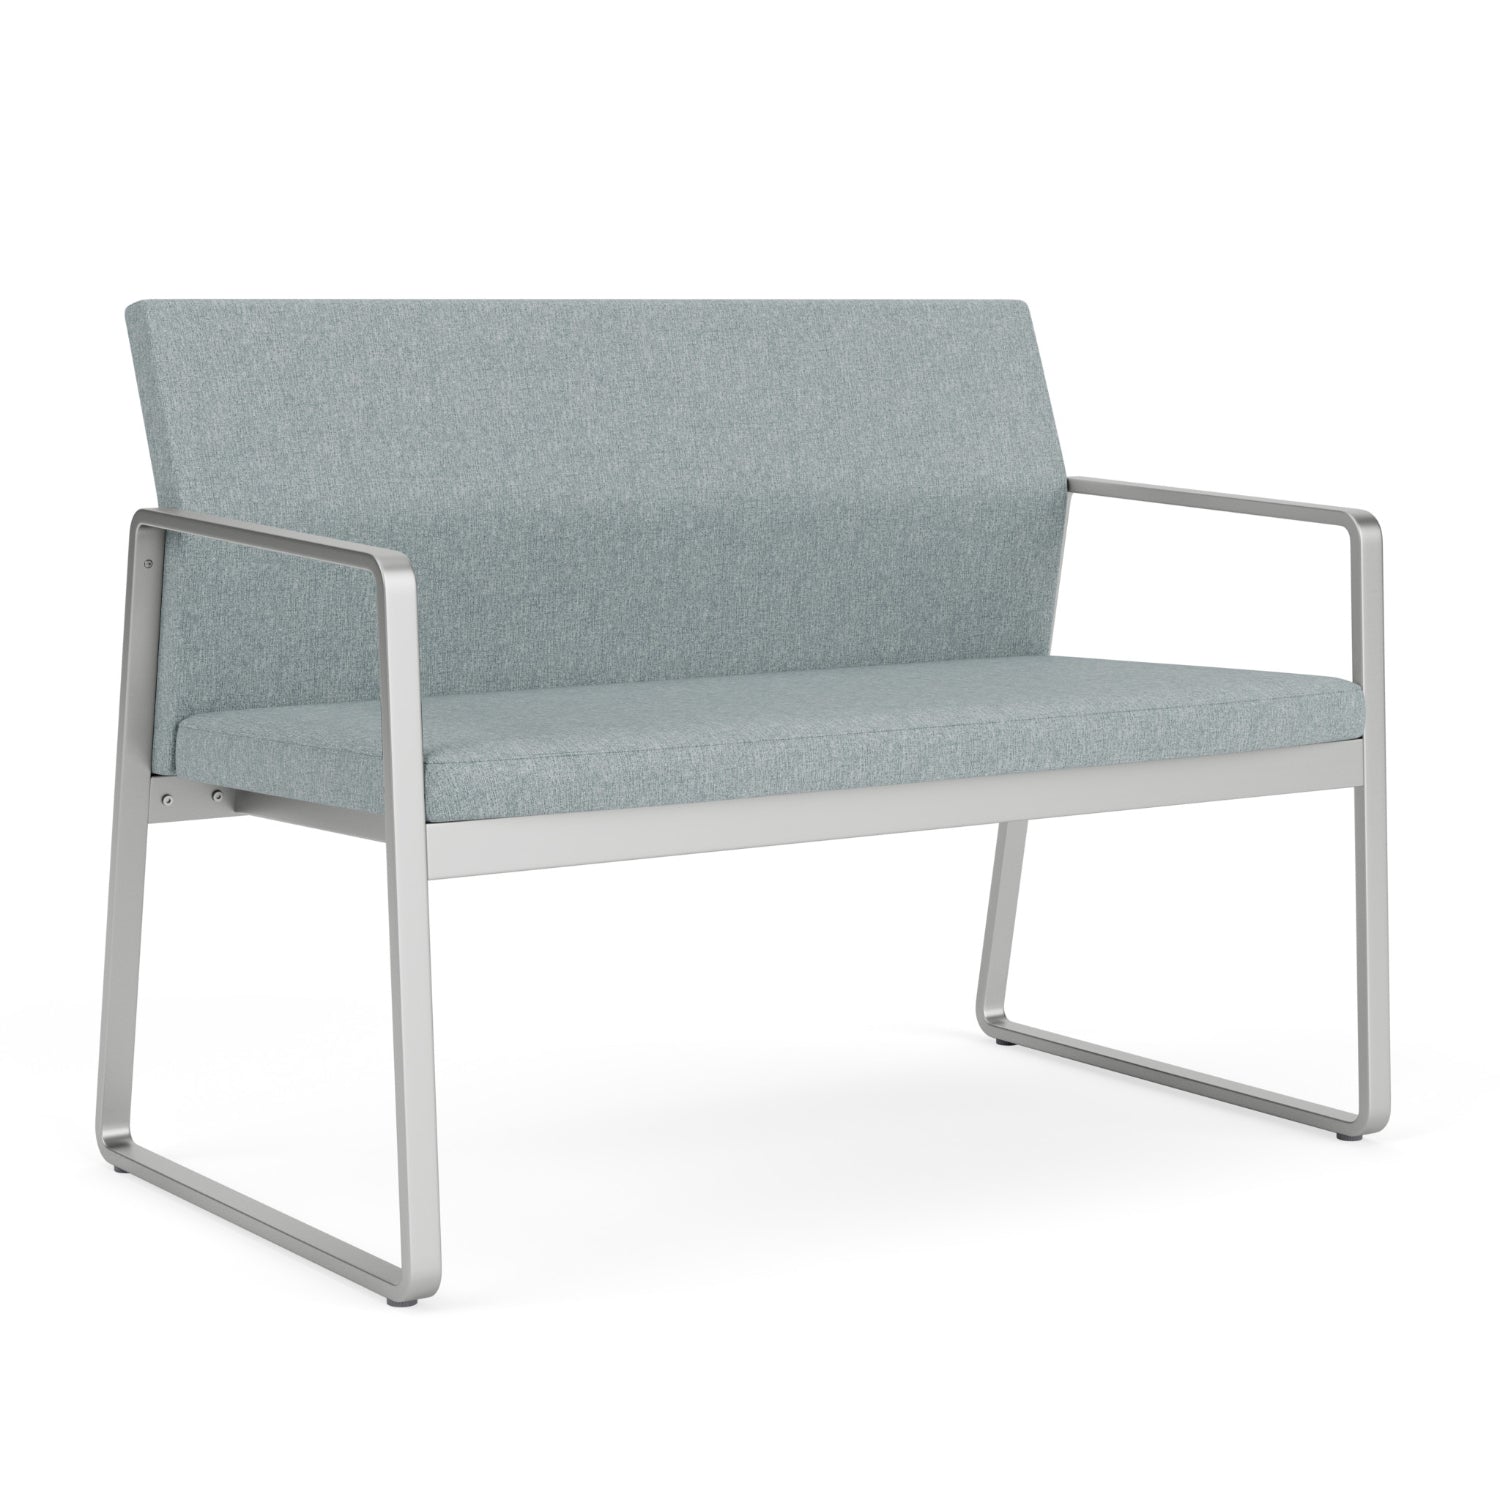 Gansett Collection Reception Seating, Loveseat, Healthcare Vinyl Upholstery, FREE SHIPPING